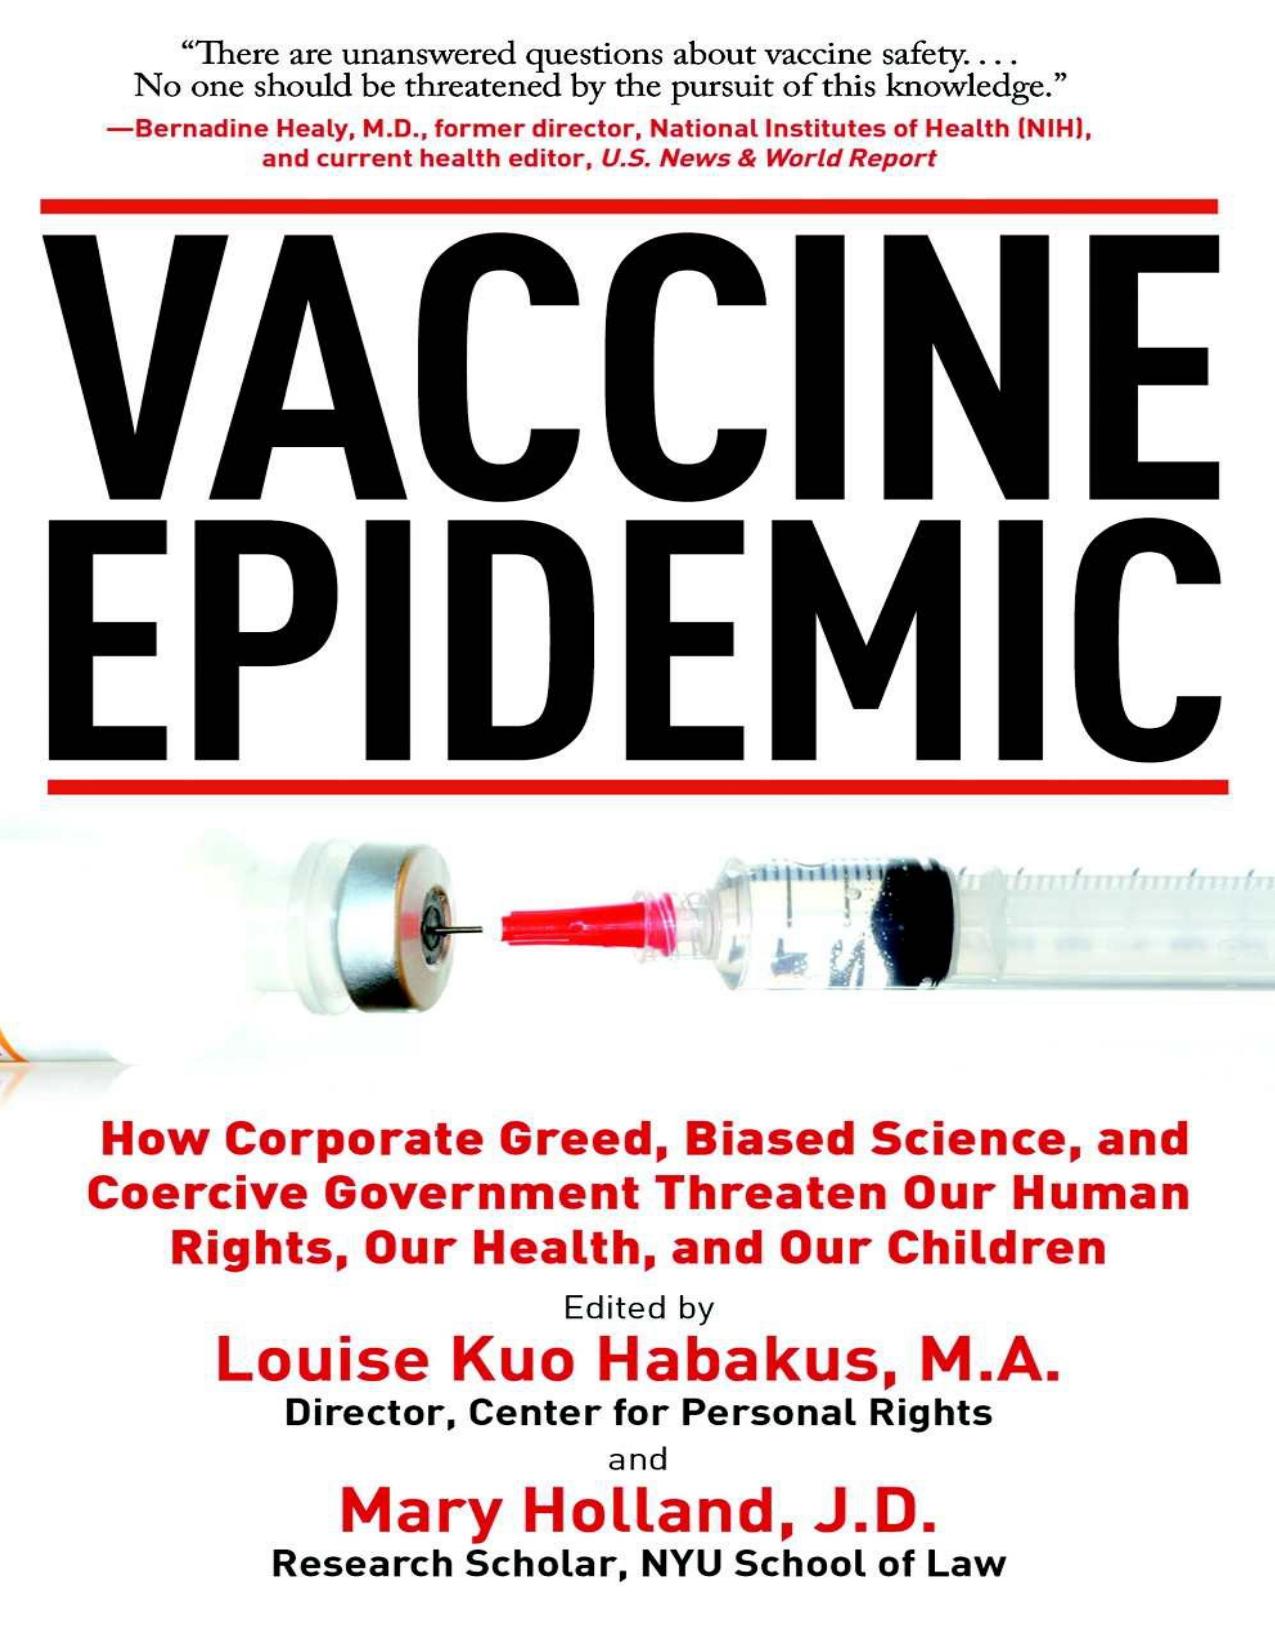 Vaccine Epidemic: How Corporate Greed, Biased Science, and Coercive Government Threaten Our Human Rights, Our Health, and Our Children by Louise Kuo Habakus